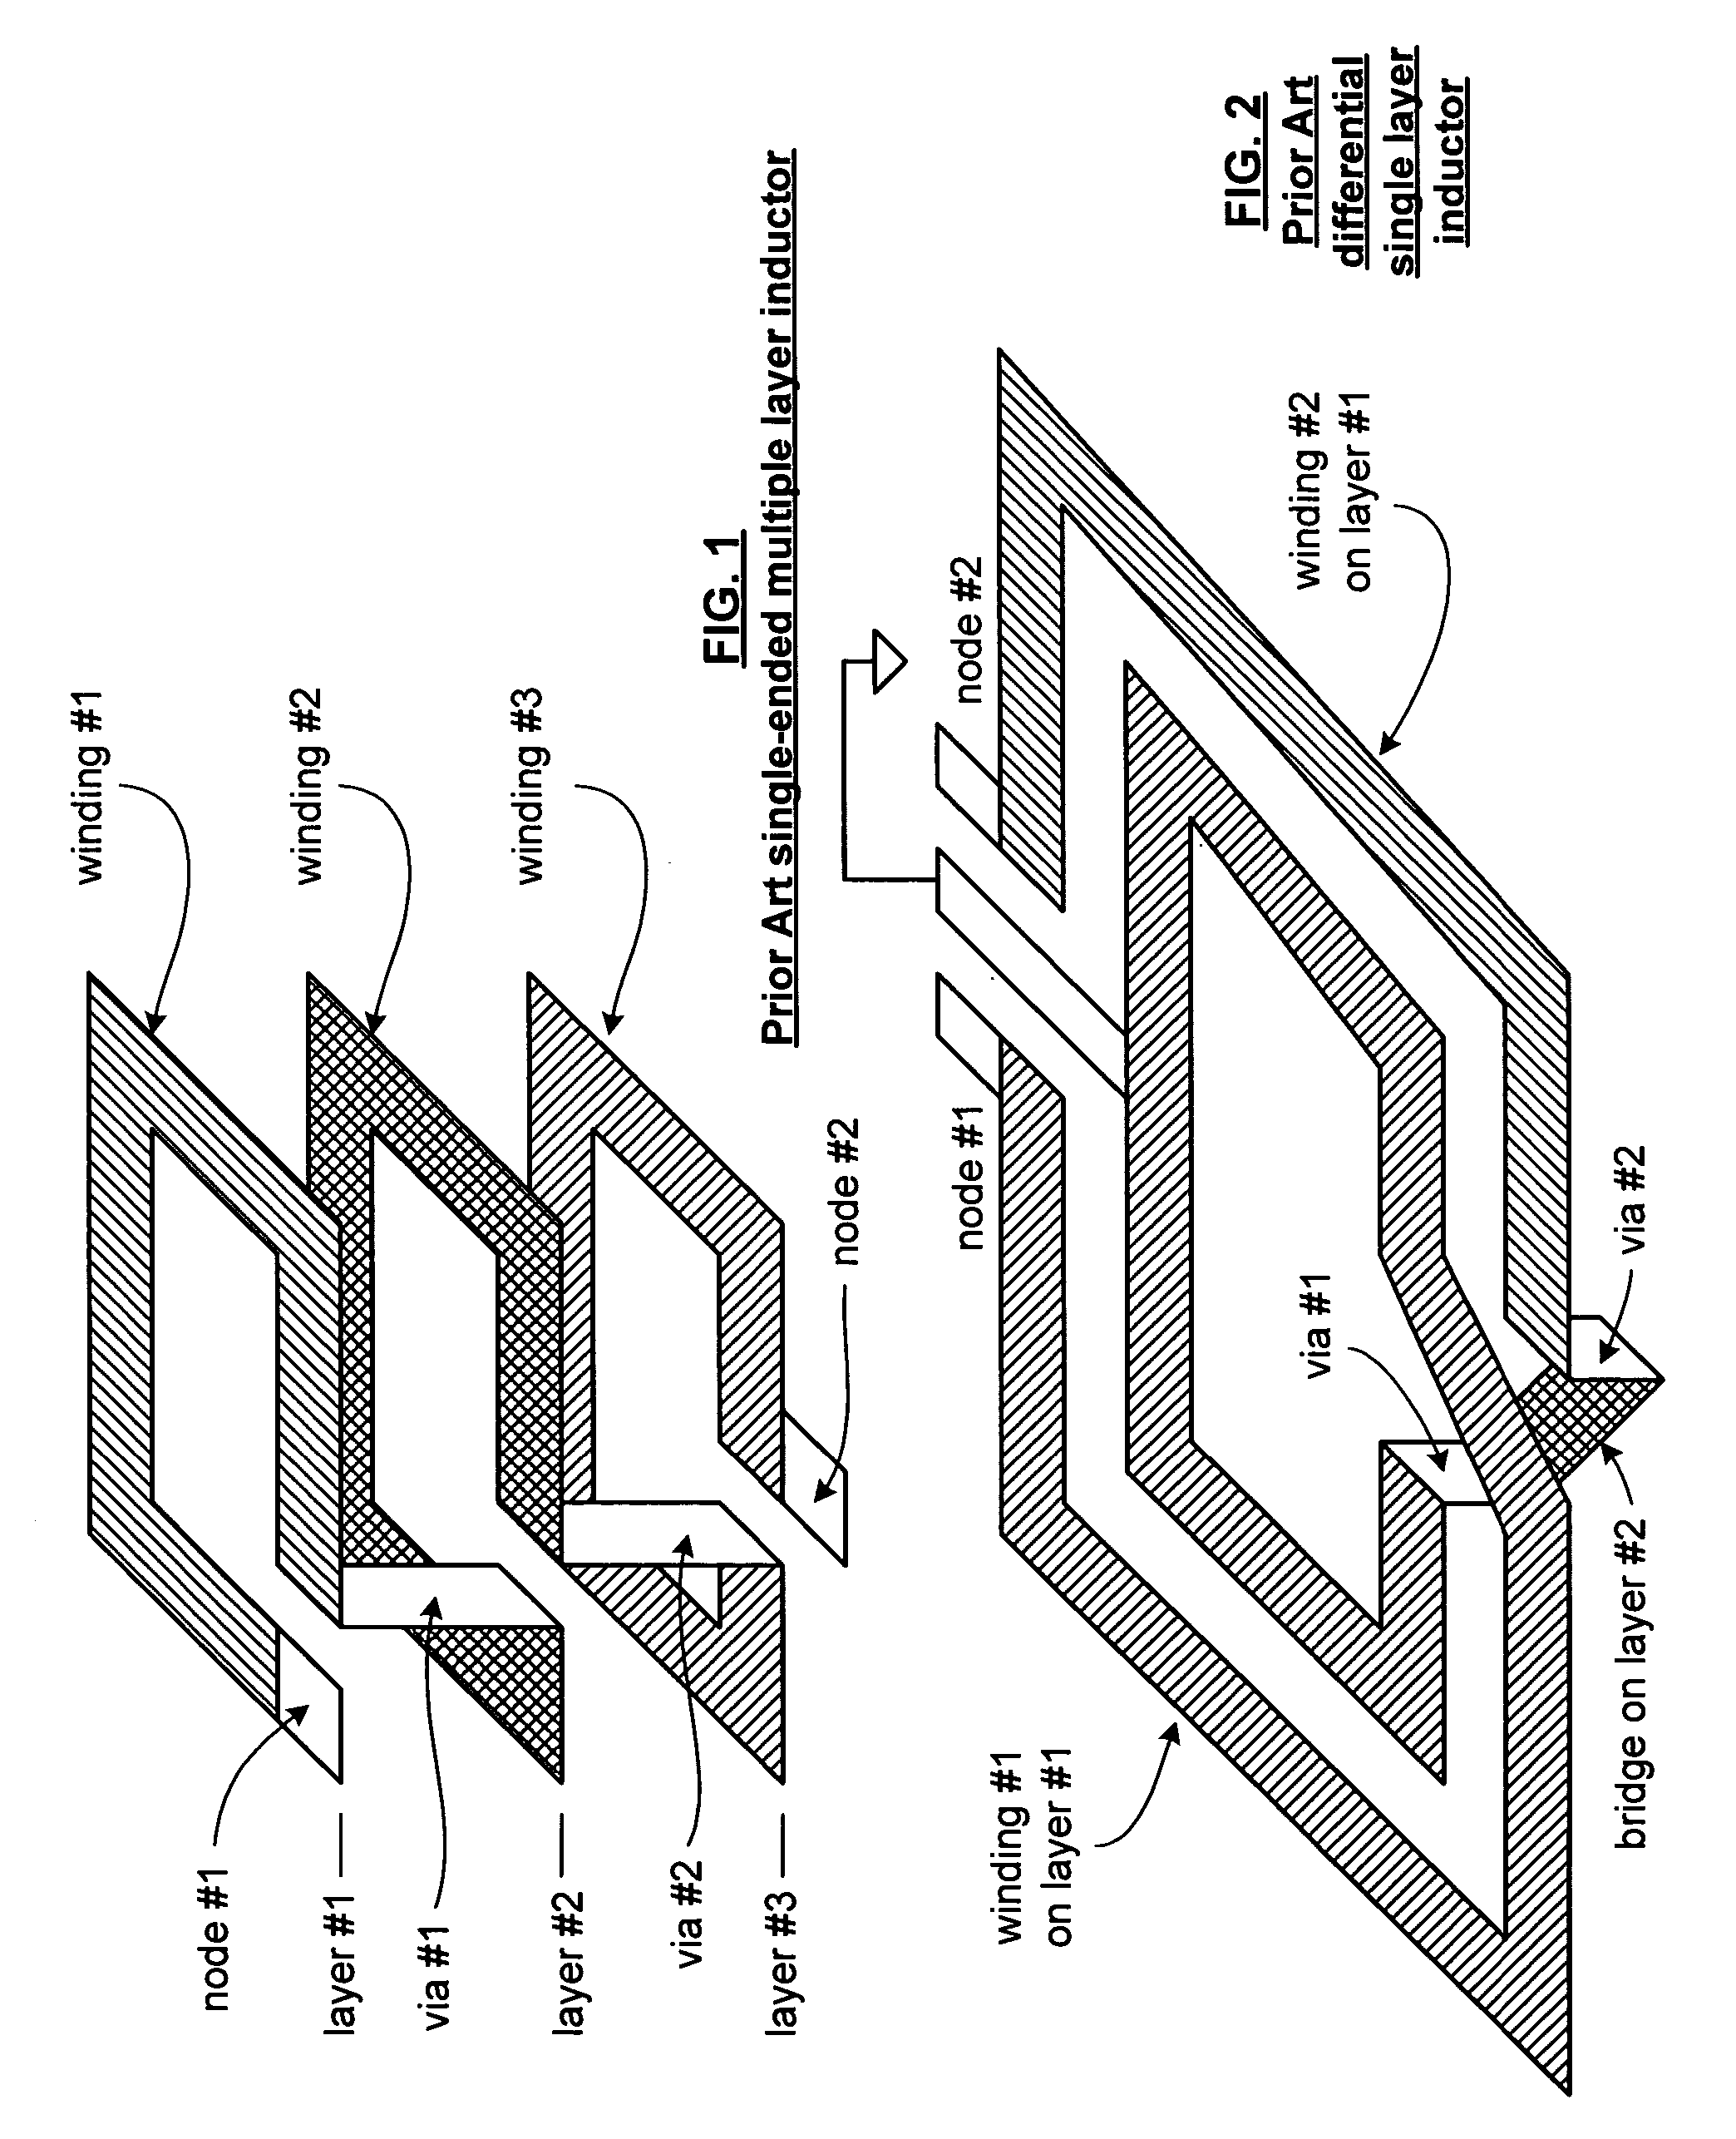 On-chip differential multi-layer inductor